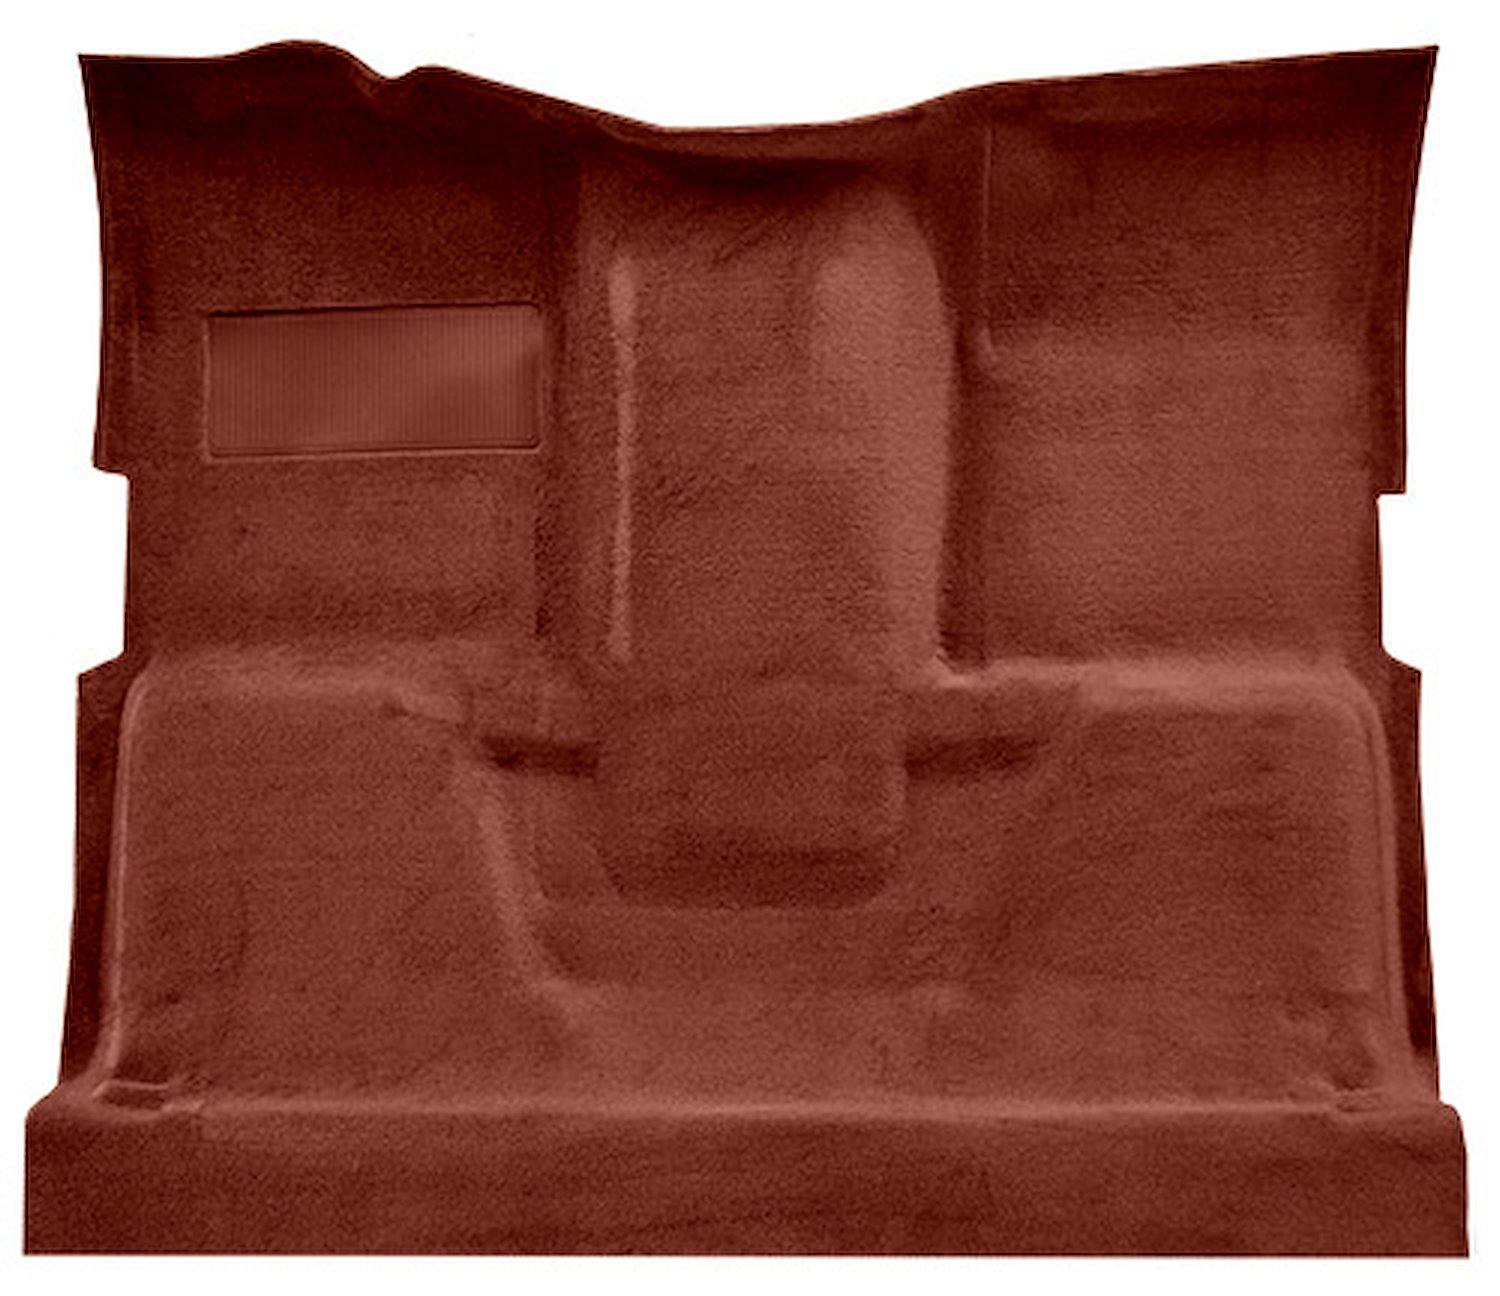 Molded Cut Pile Carpet for 1974 Chevrolet/GMC K Series Truck [Mass Backing, 1-Piece, Maple/Canyon]